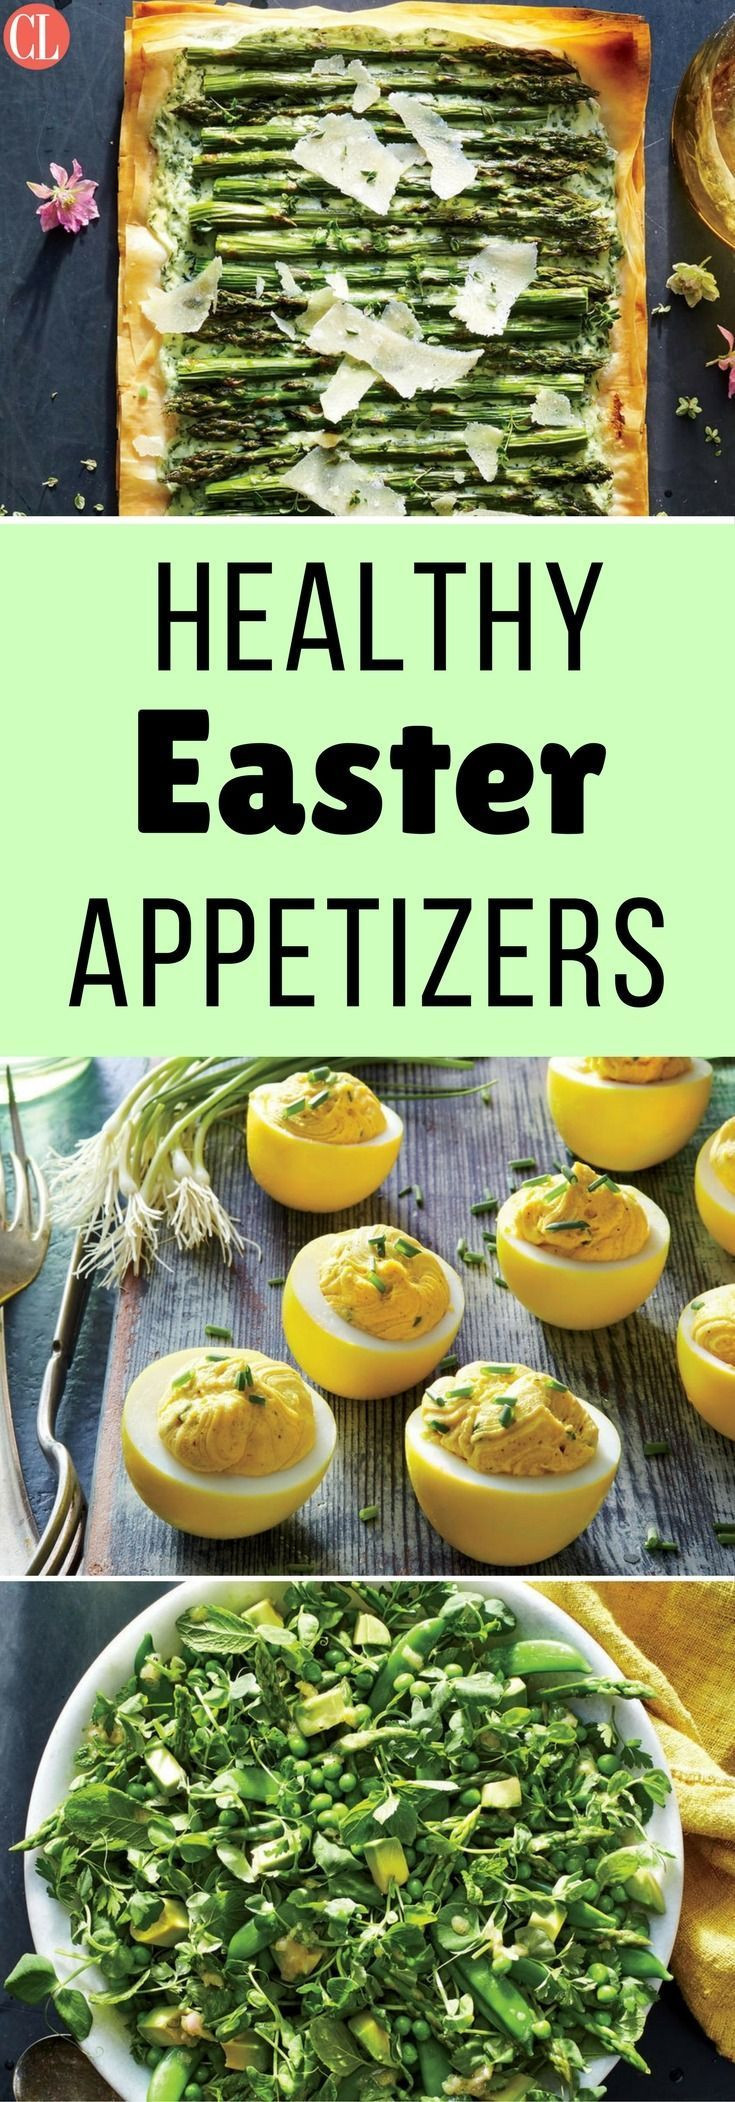 Cooking Light Easter Dinner
 45 Healthy Side Dishes to Celebrate Easter